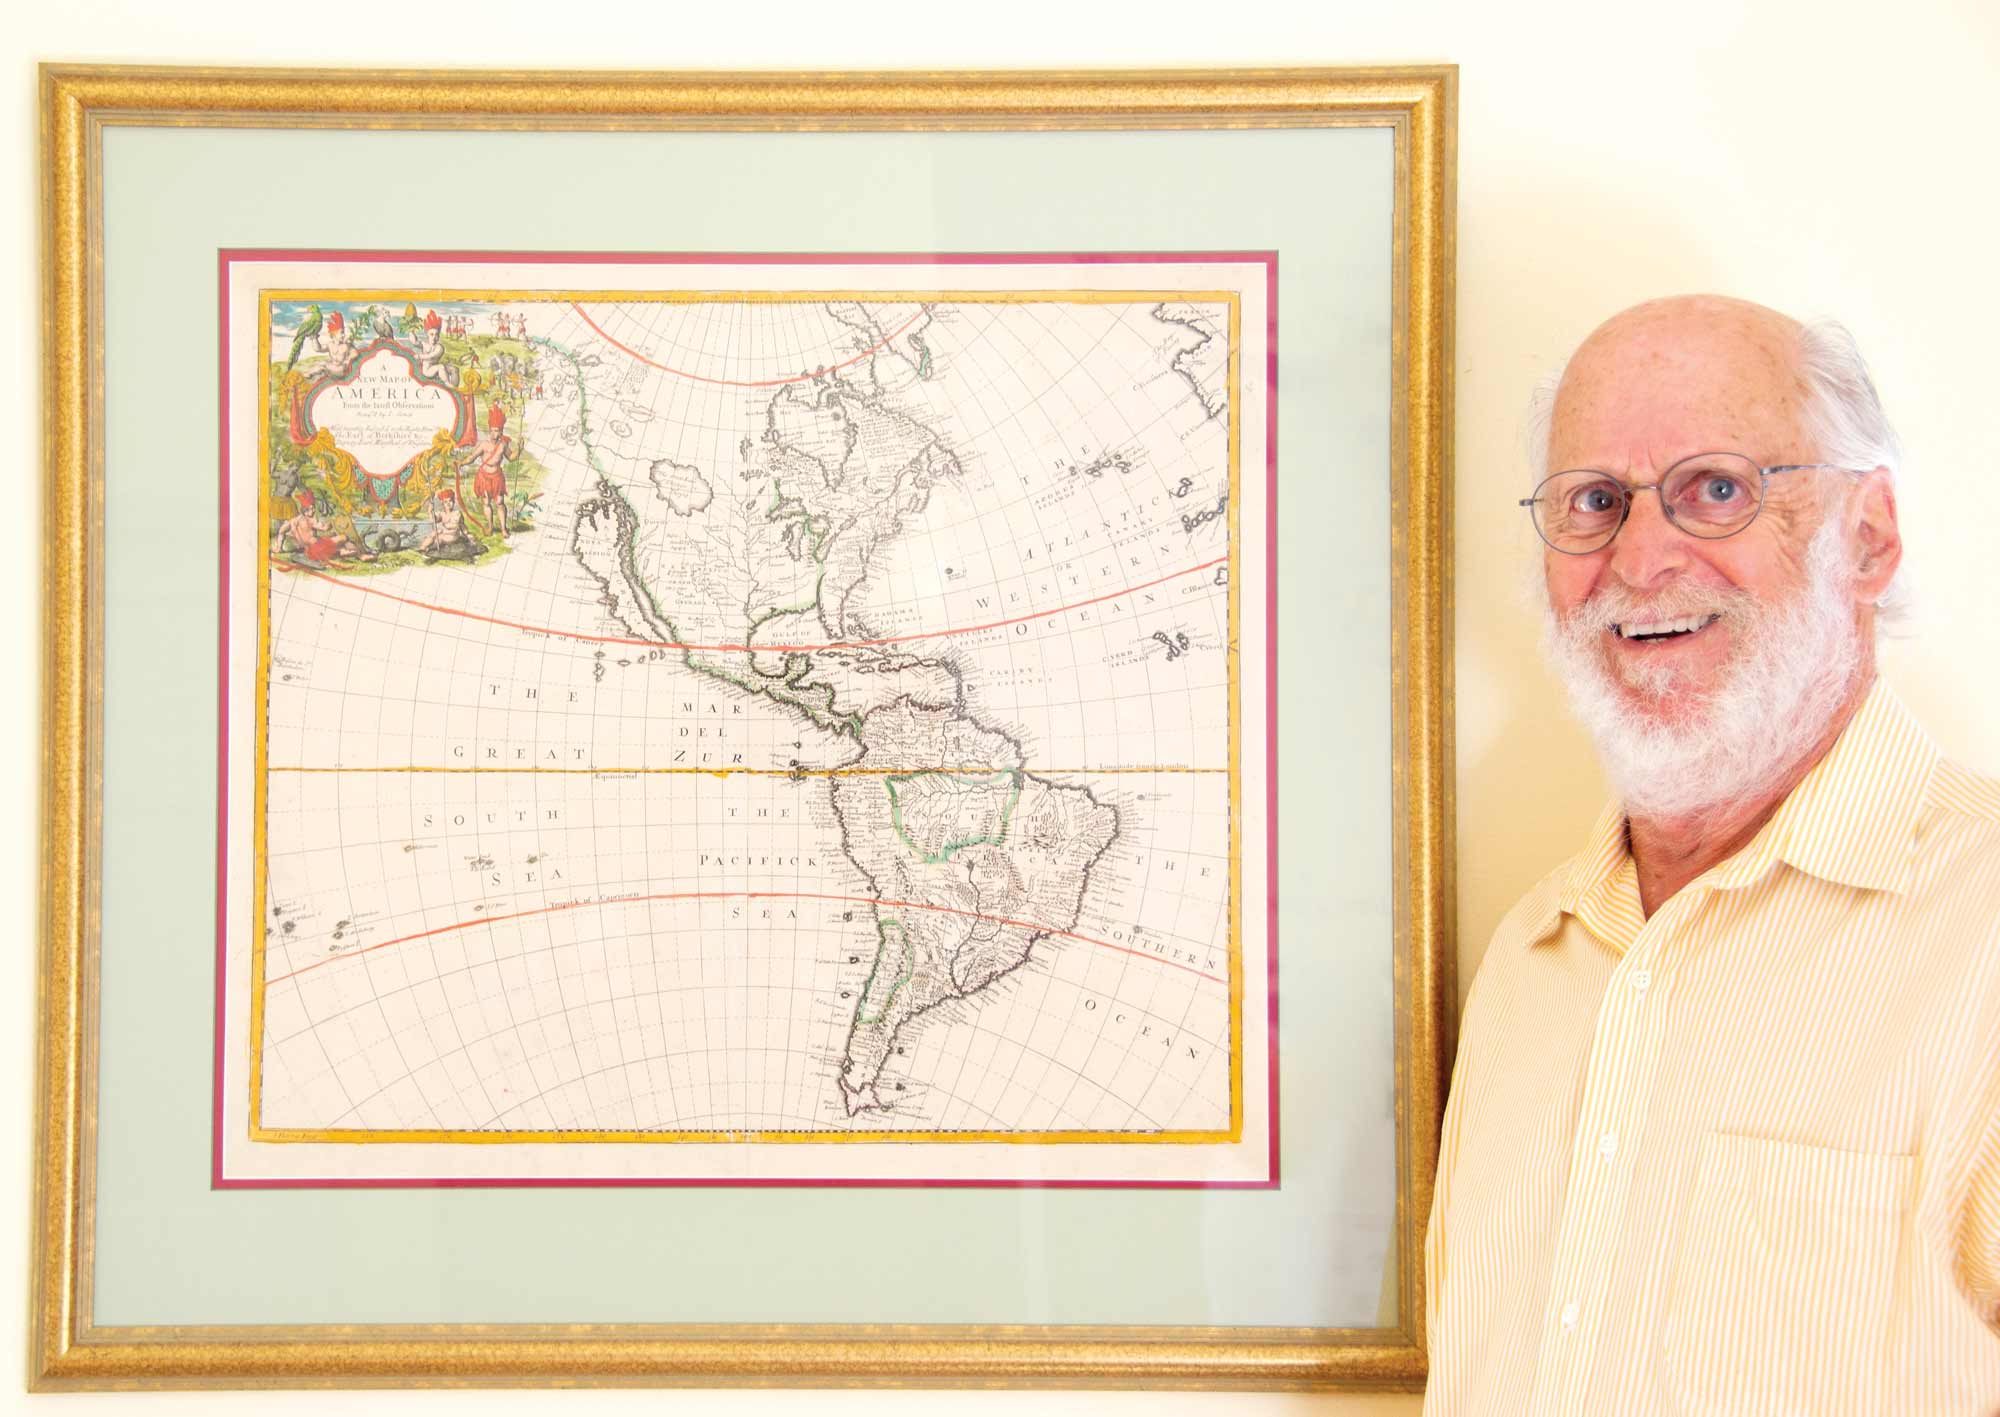 Steven Horowitz with a framed map